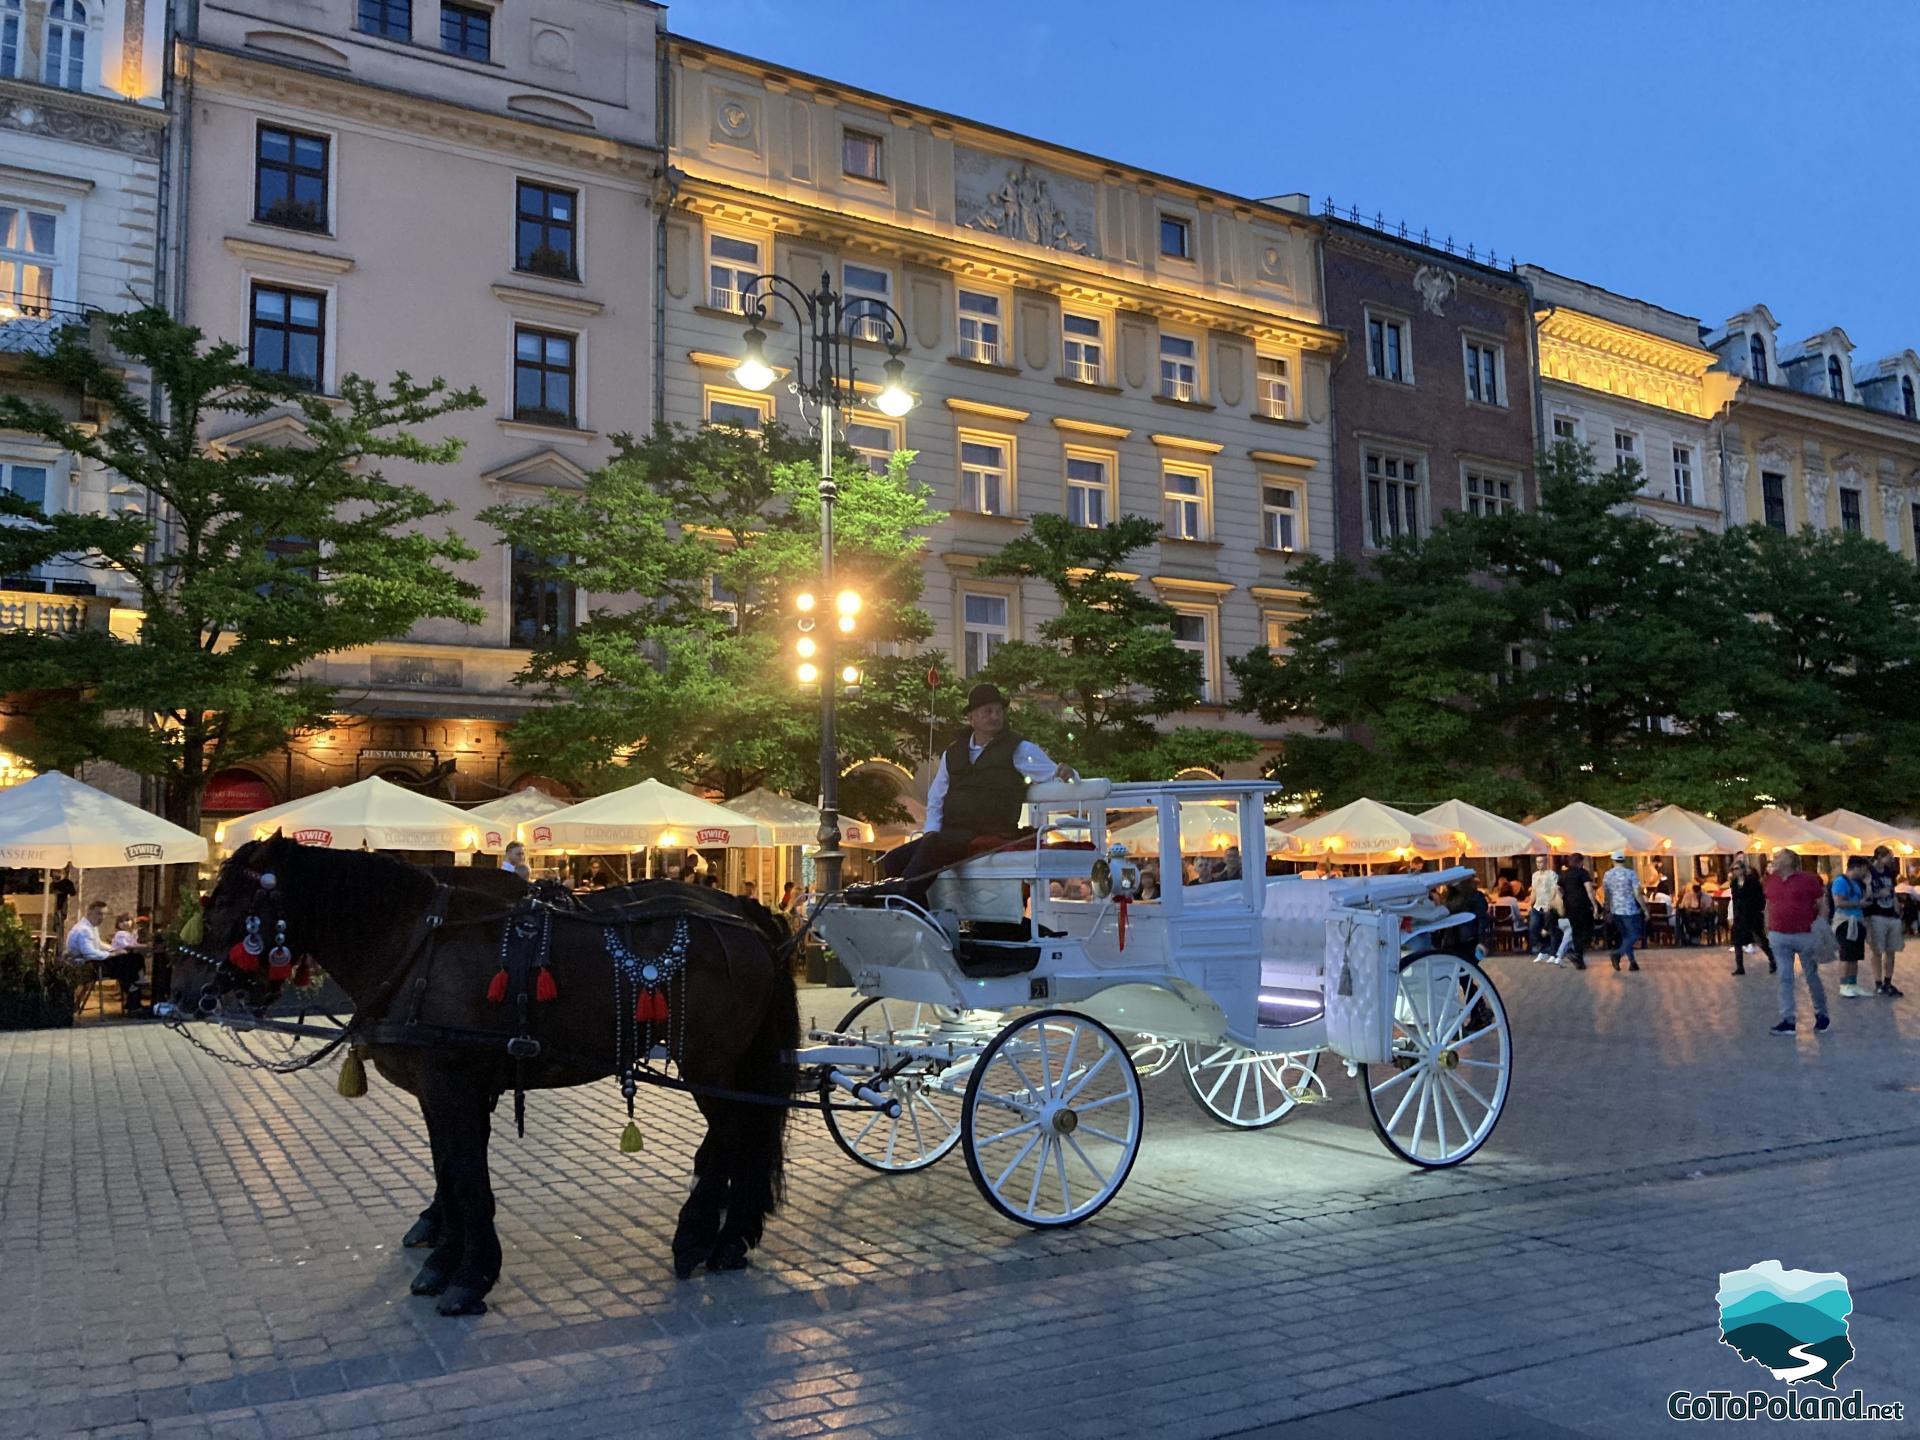 there is a white carriage with two brown horses in the street, it is evening, the buildings in this street are illuminated